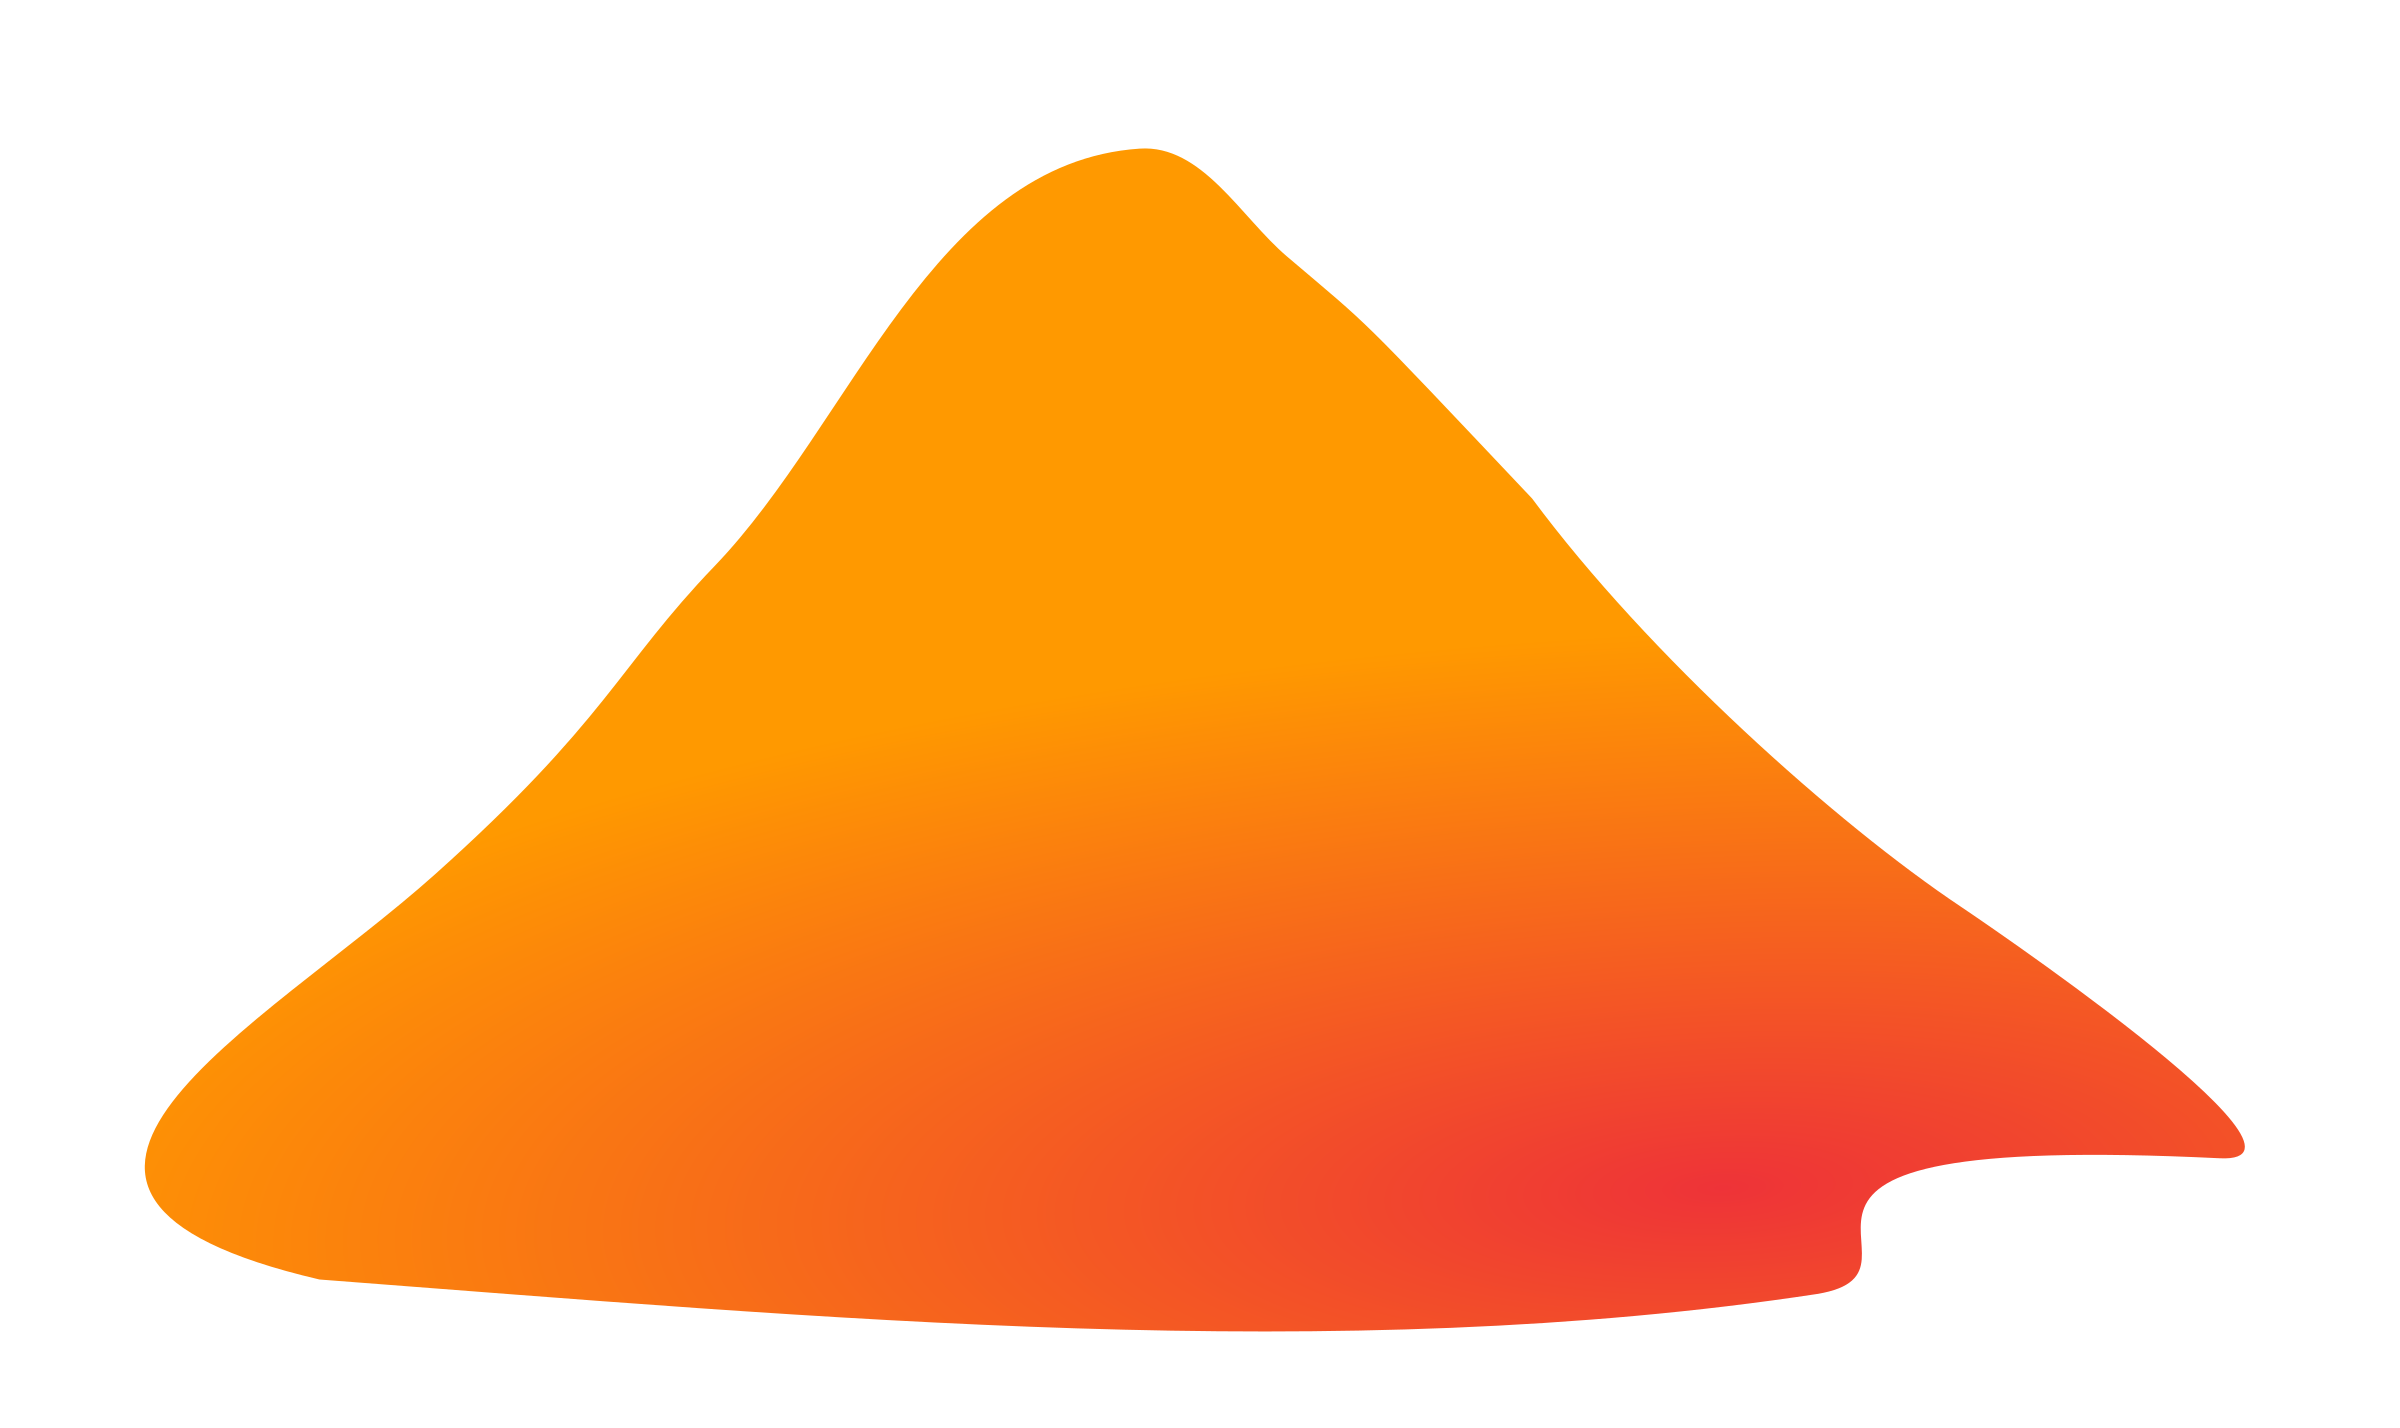 Volcano clip art free clipart images